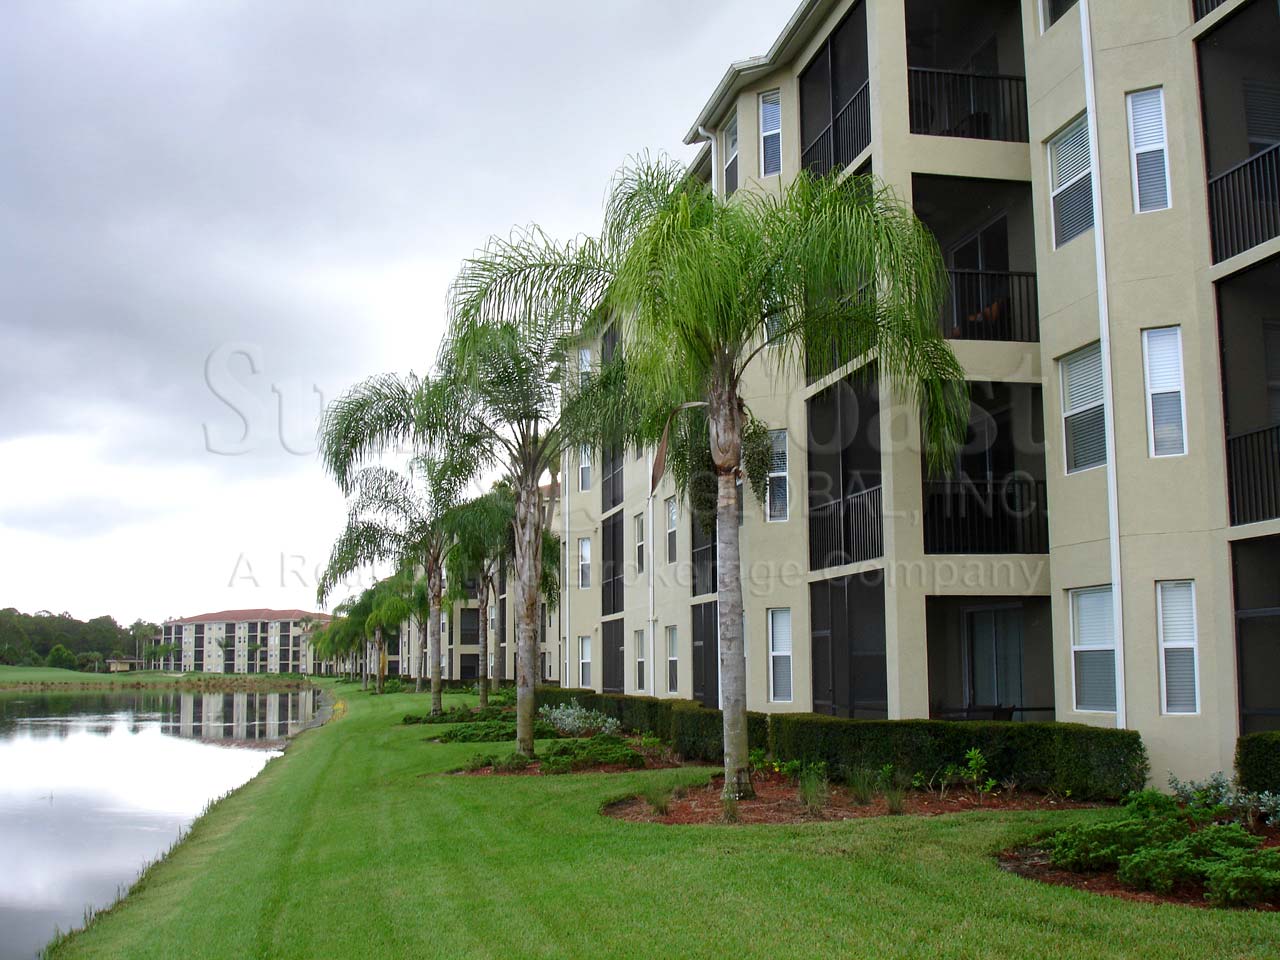 HERITAGE BAY Terraces are 4-story condos with tile roofs and car ports